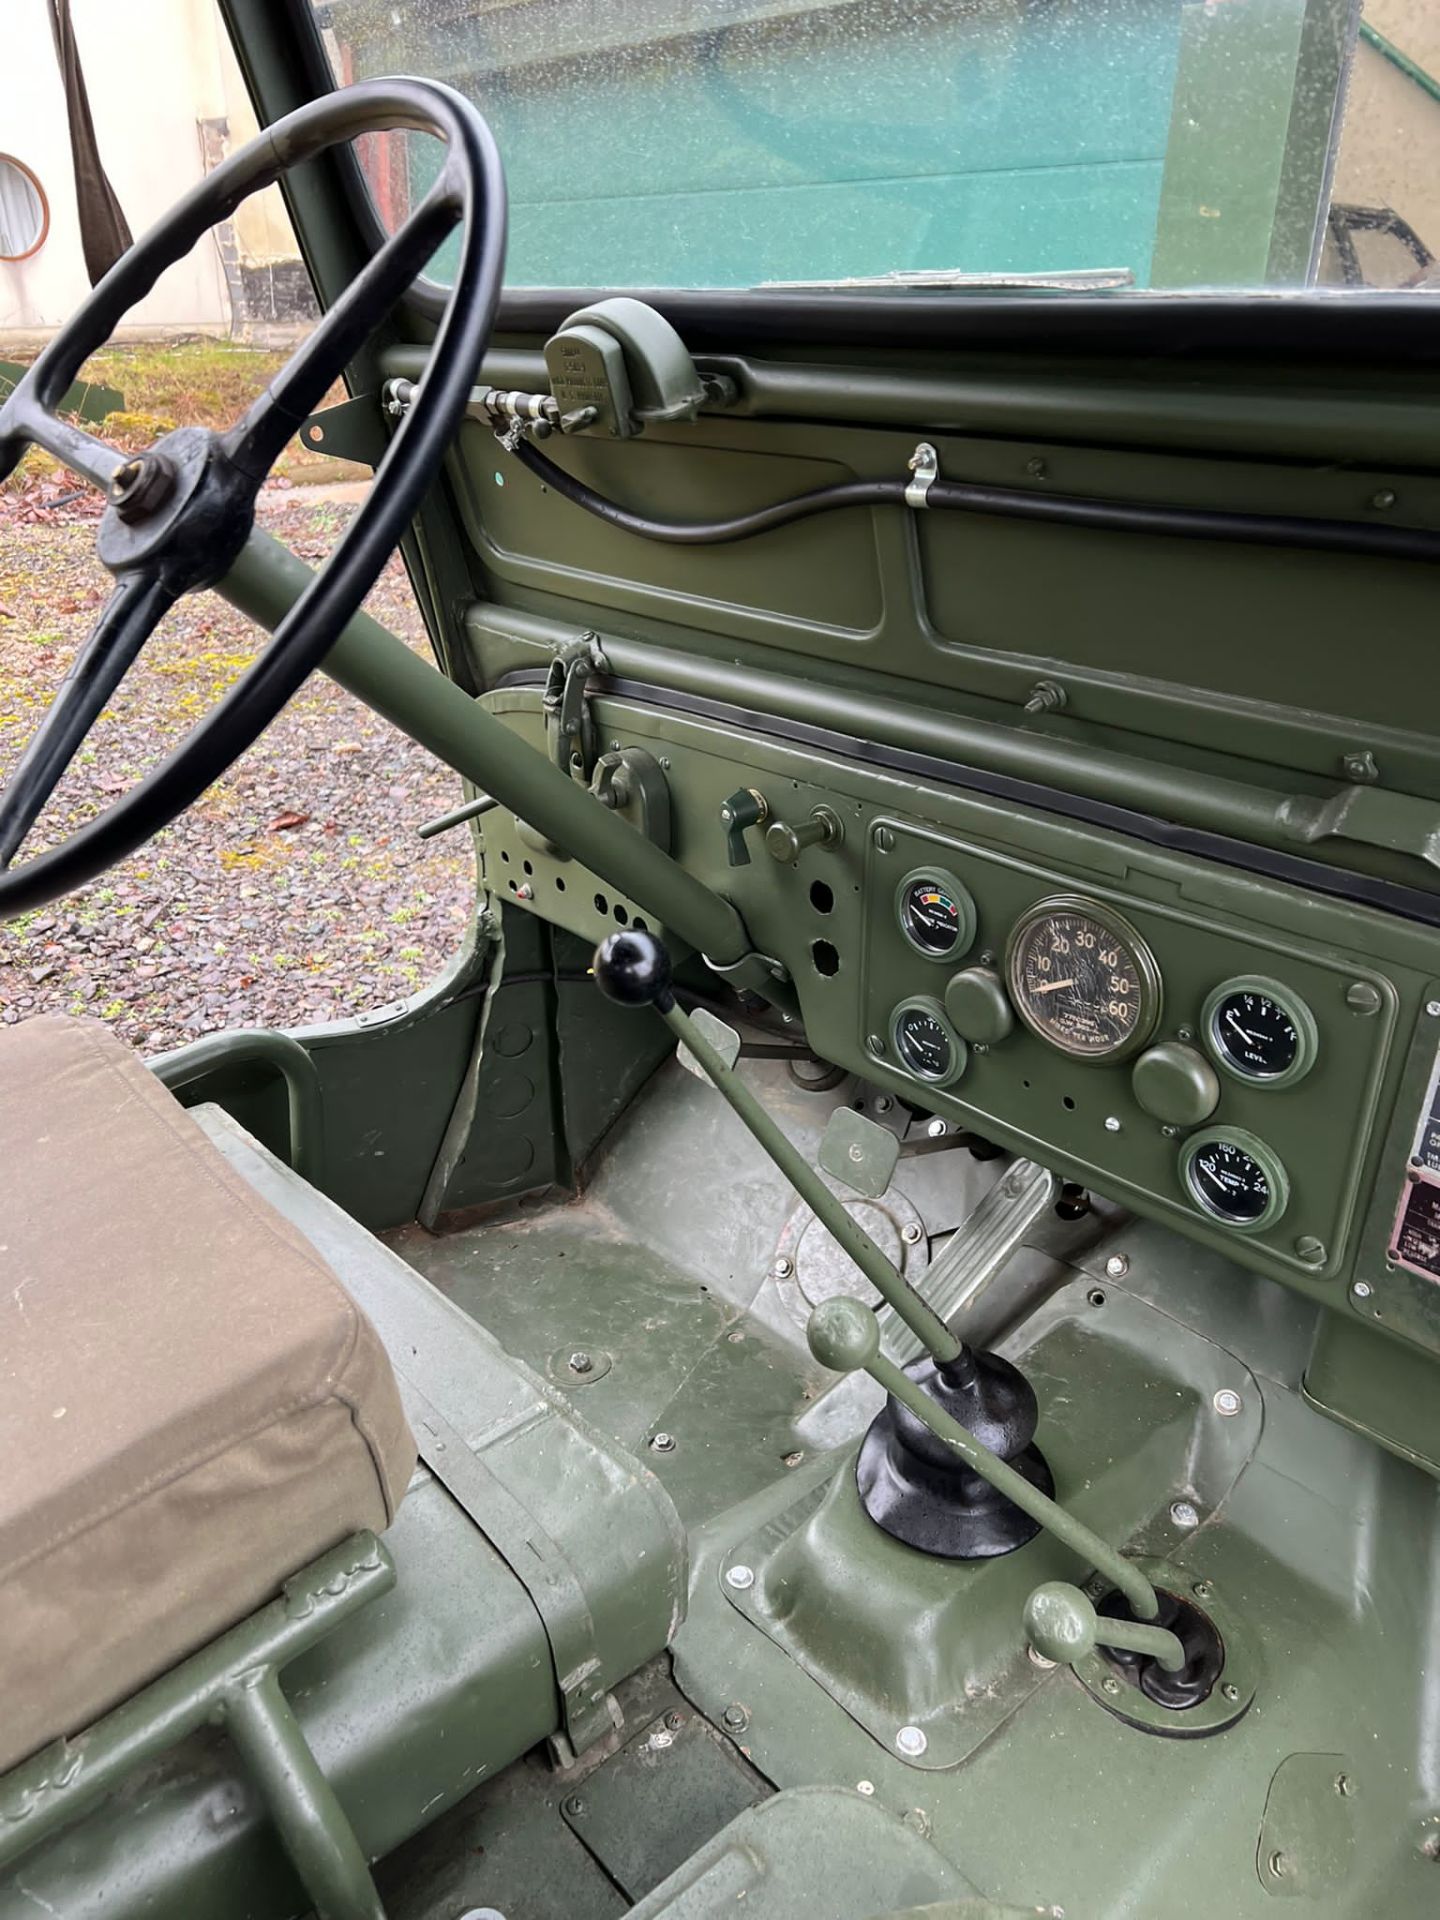 Willys Jeep Model M38 1945 - Image 10 of 13